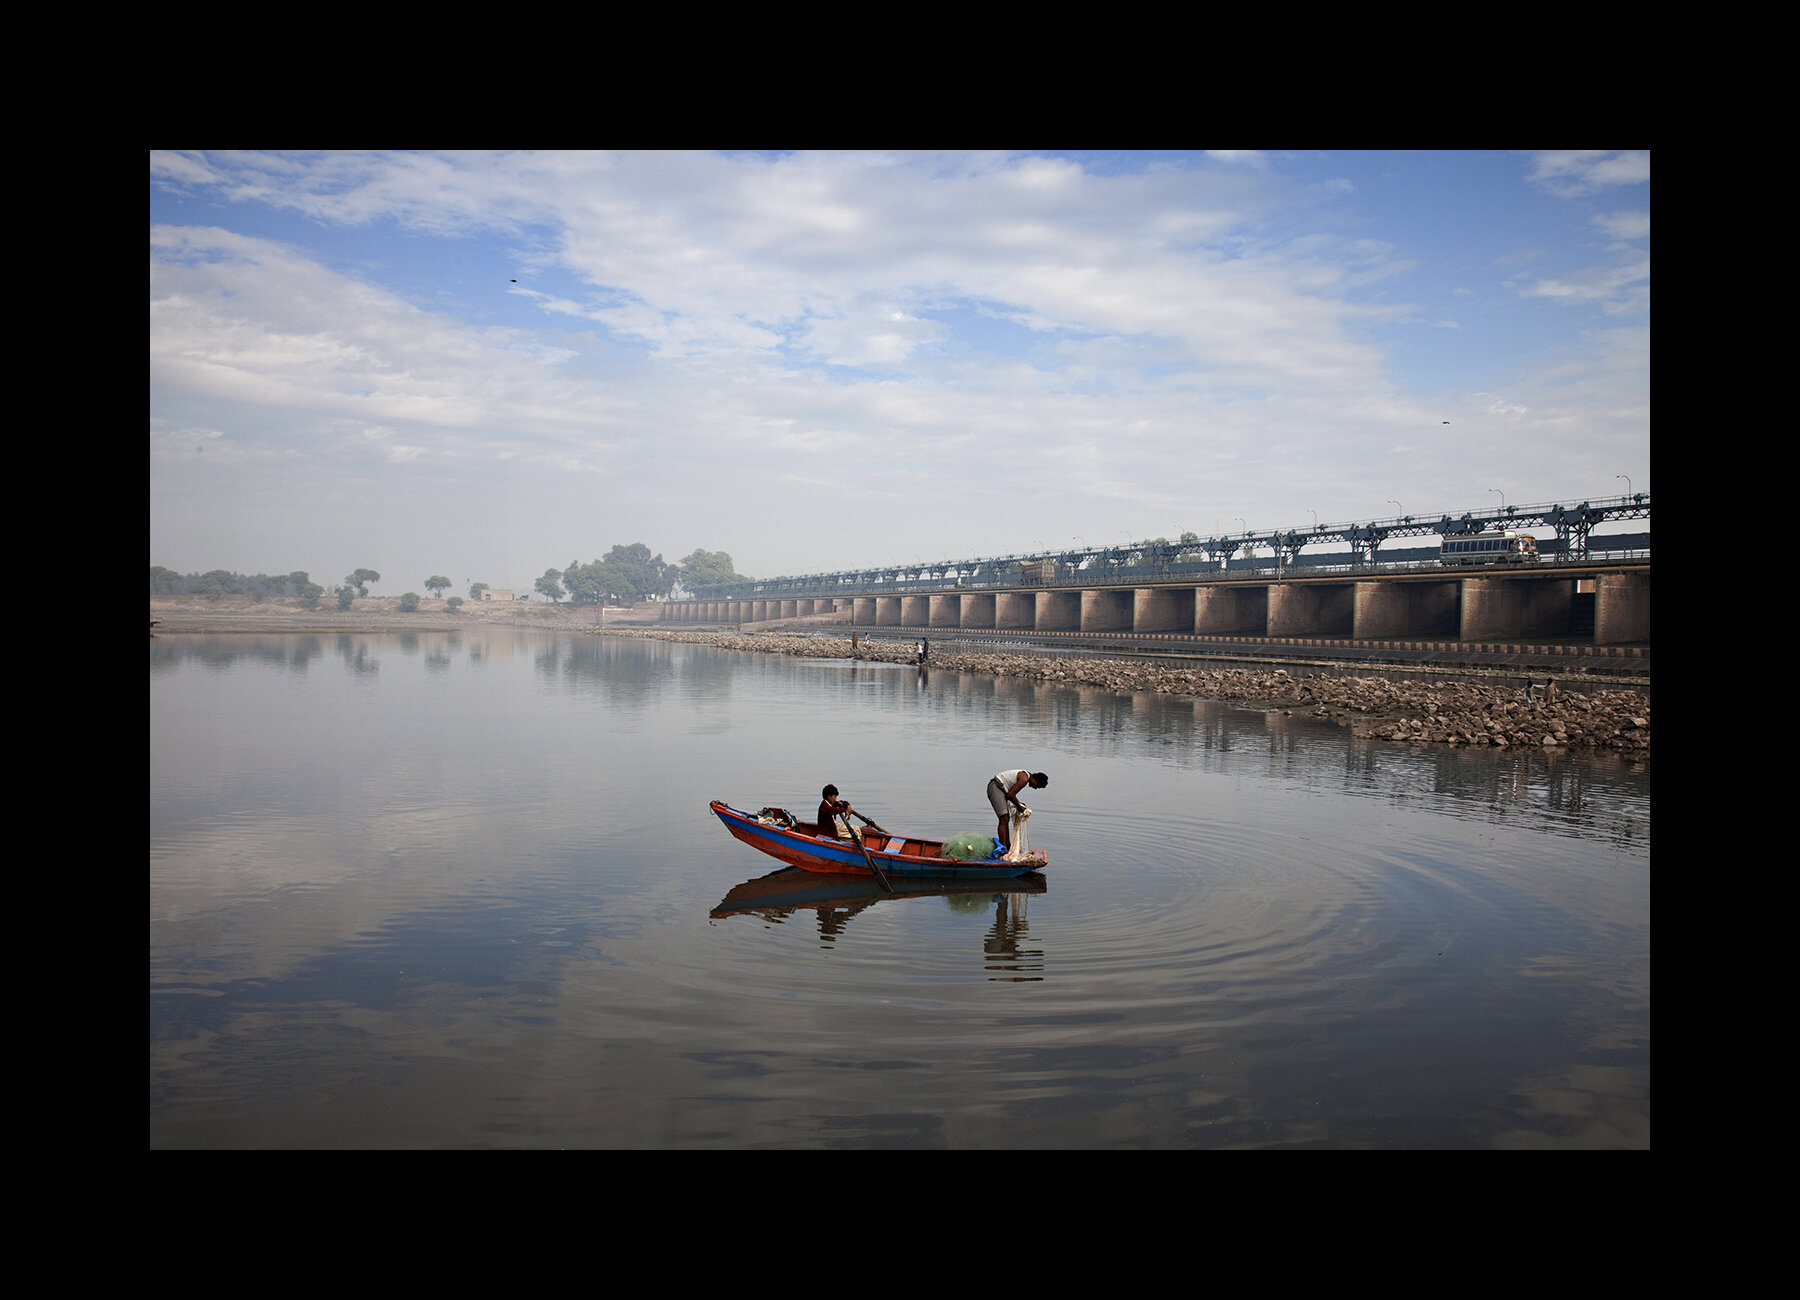  Scene along the Balloki Headworks that is part of the British built canal system in the Punjab, Pakistan. 2009 